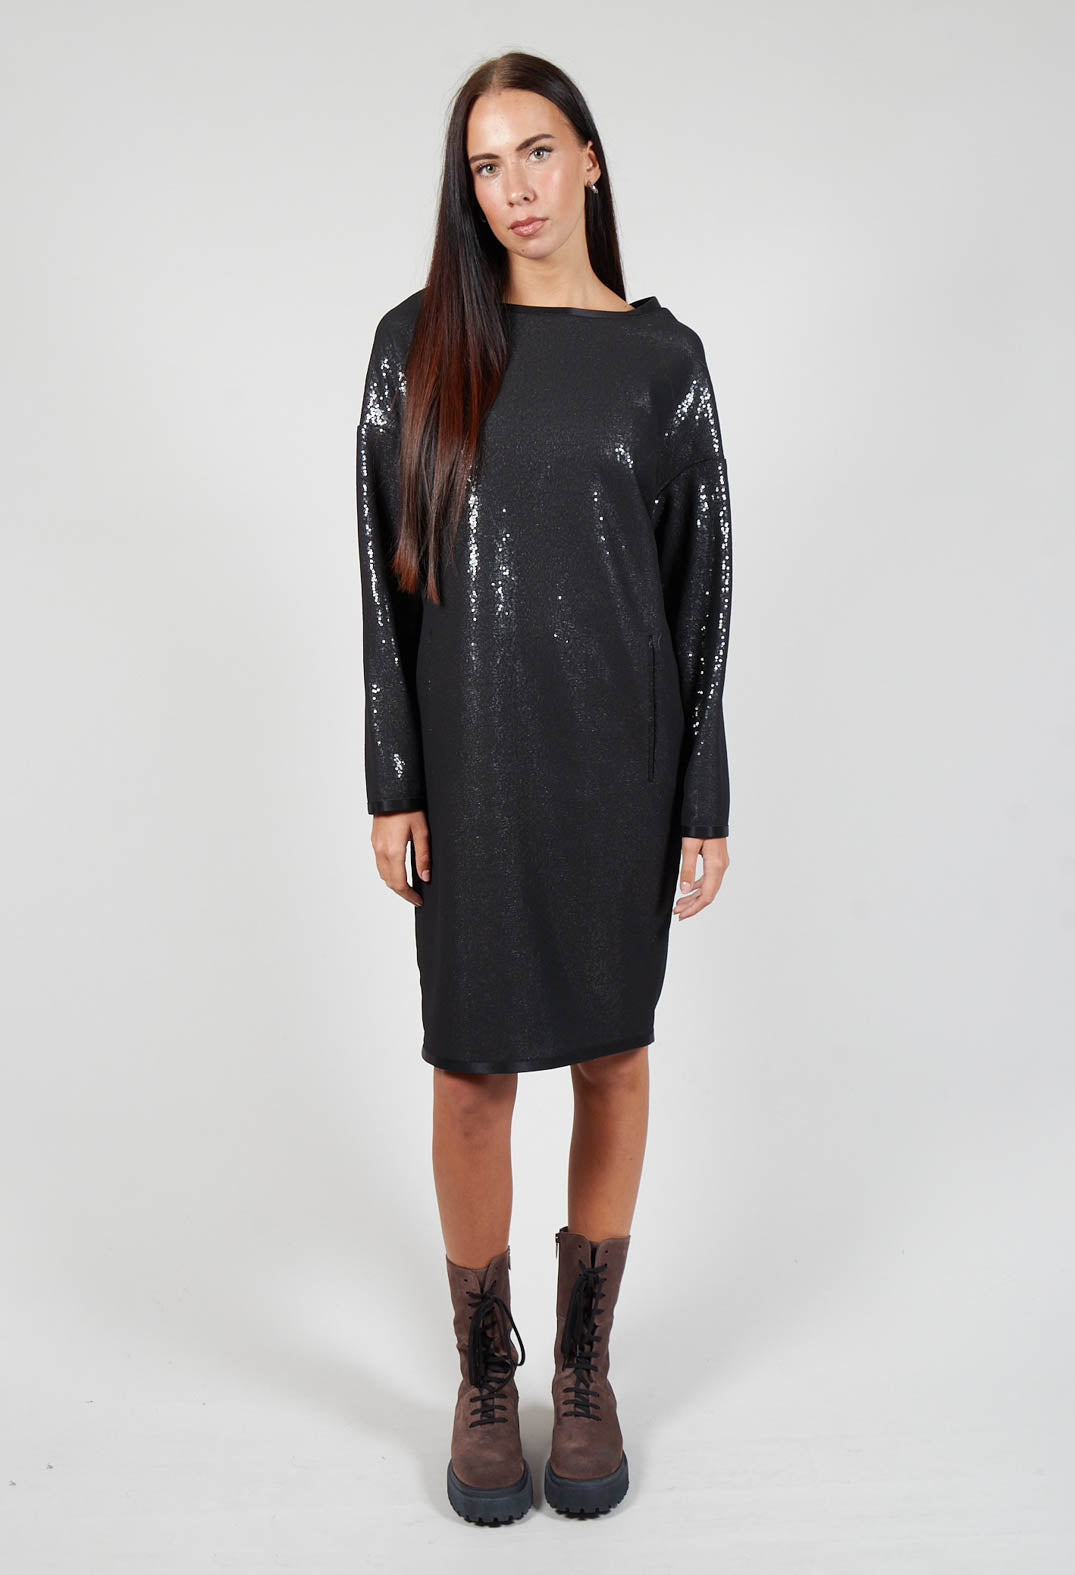 lady wearing a black sparkly vita dress with long sleeve detailing and chunky boots